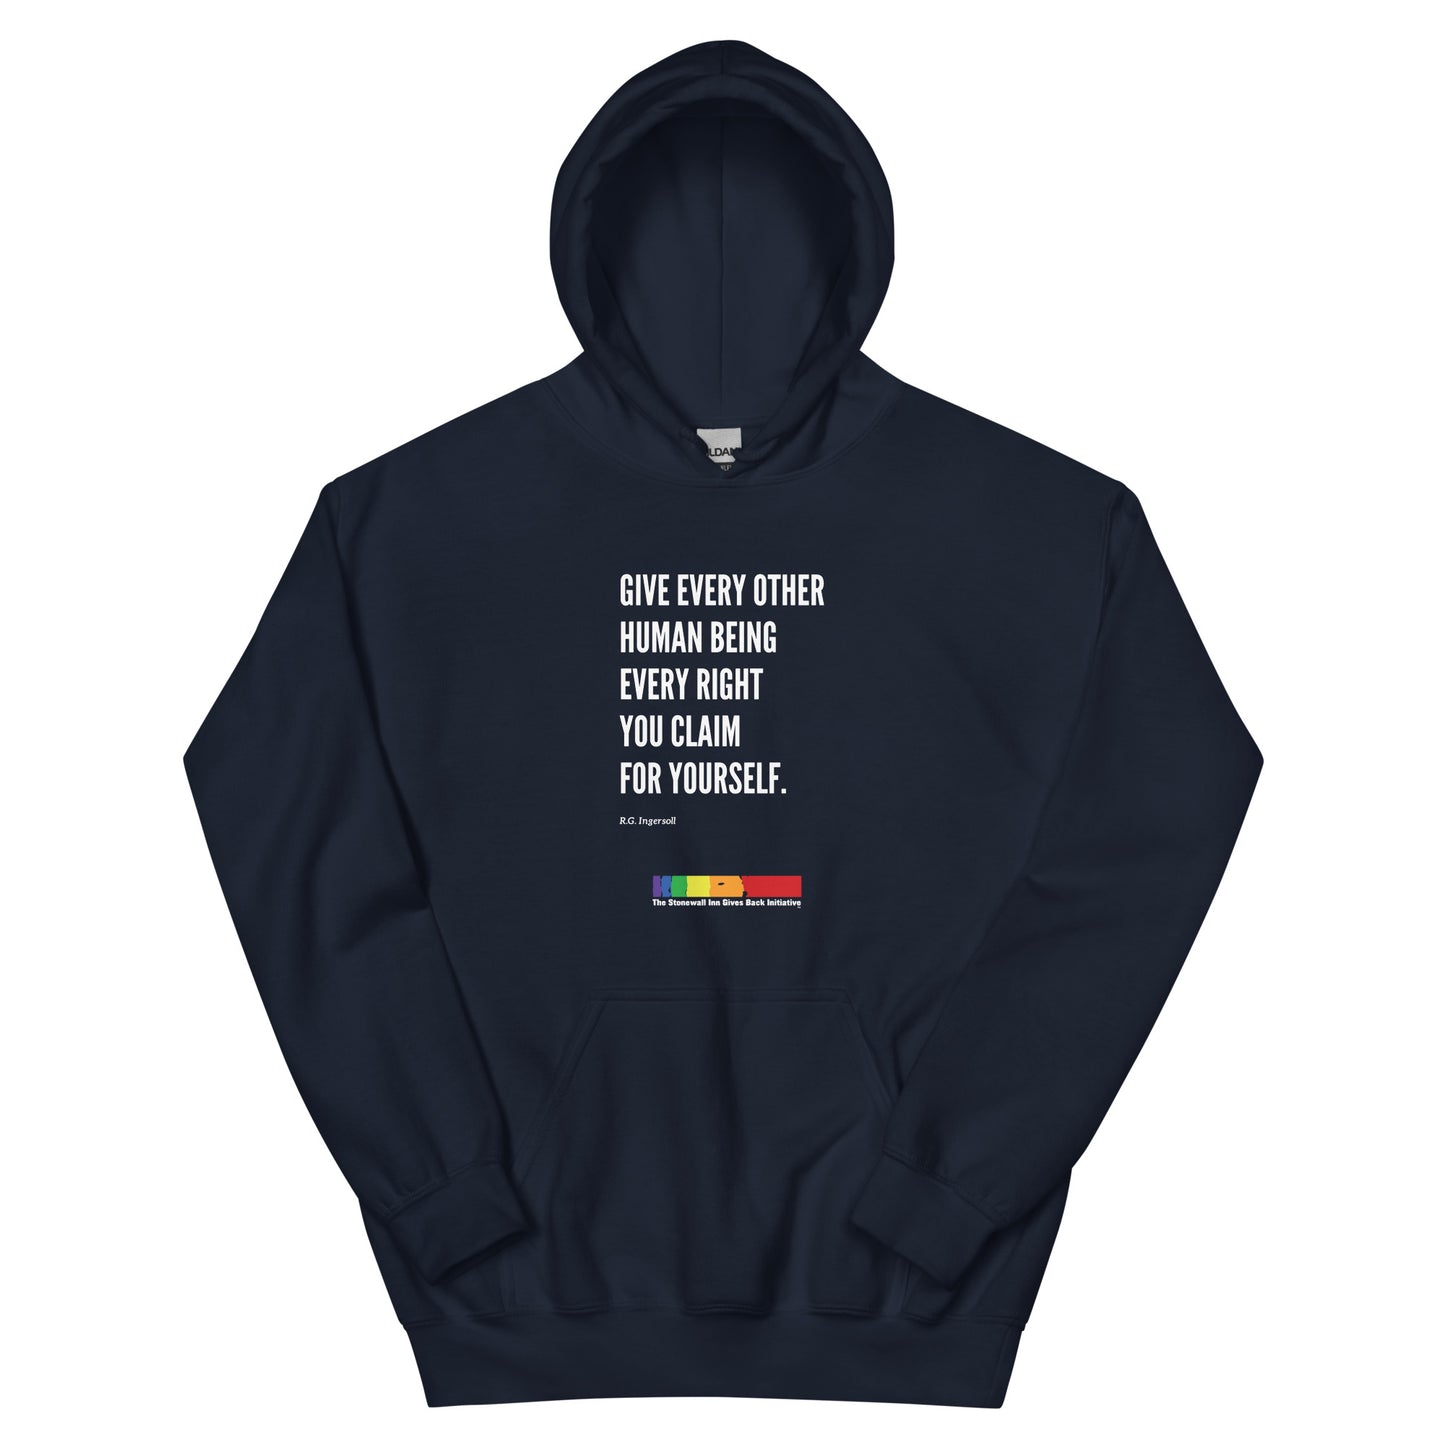 "Give Every Other Human Being Every Right You Claim For Yourself" LGBTQ+ Support Hoodie in Navy